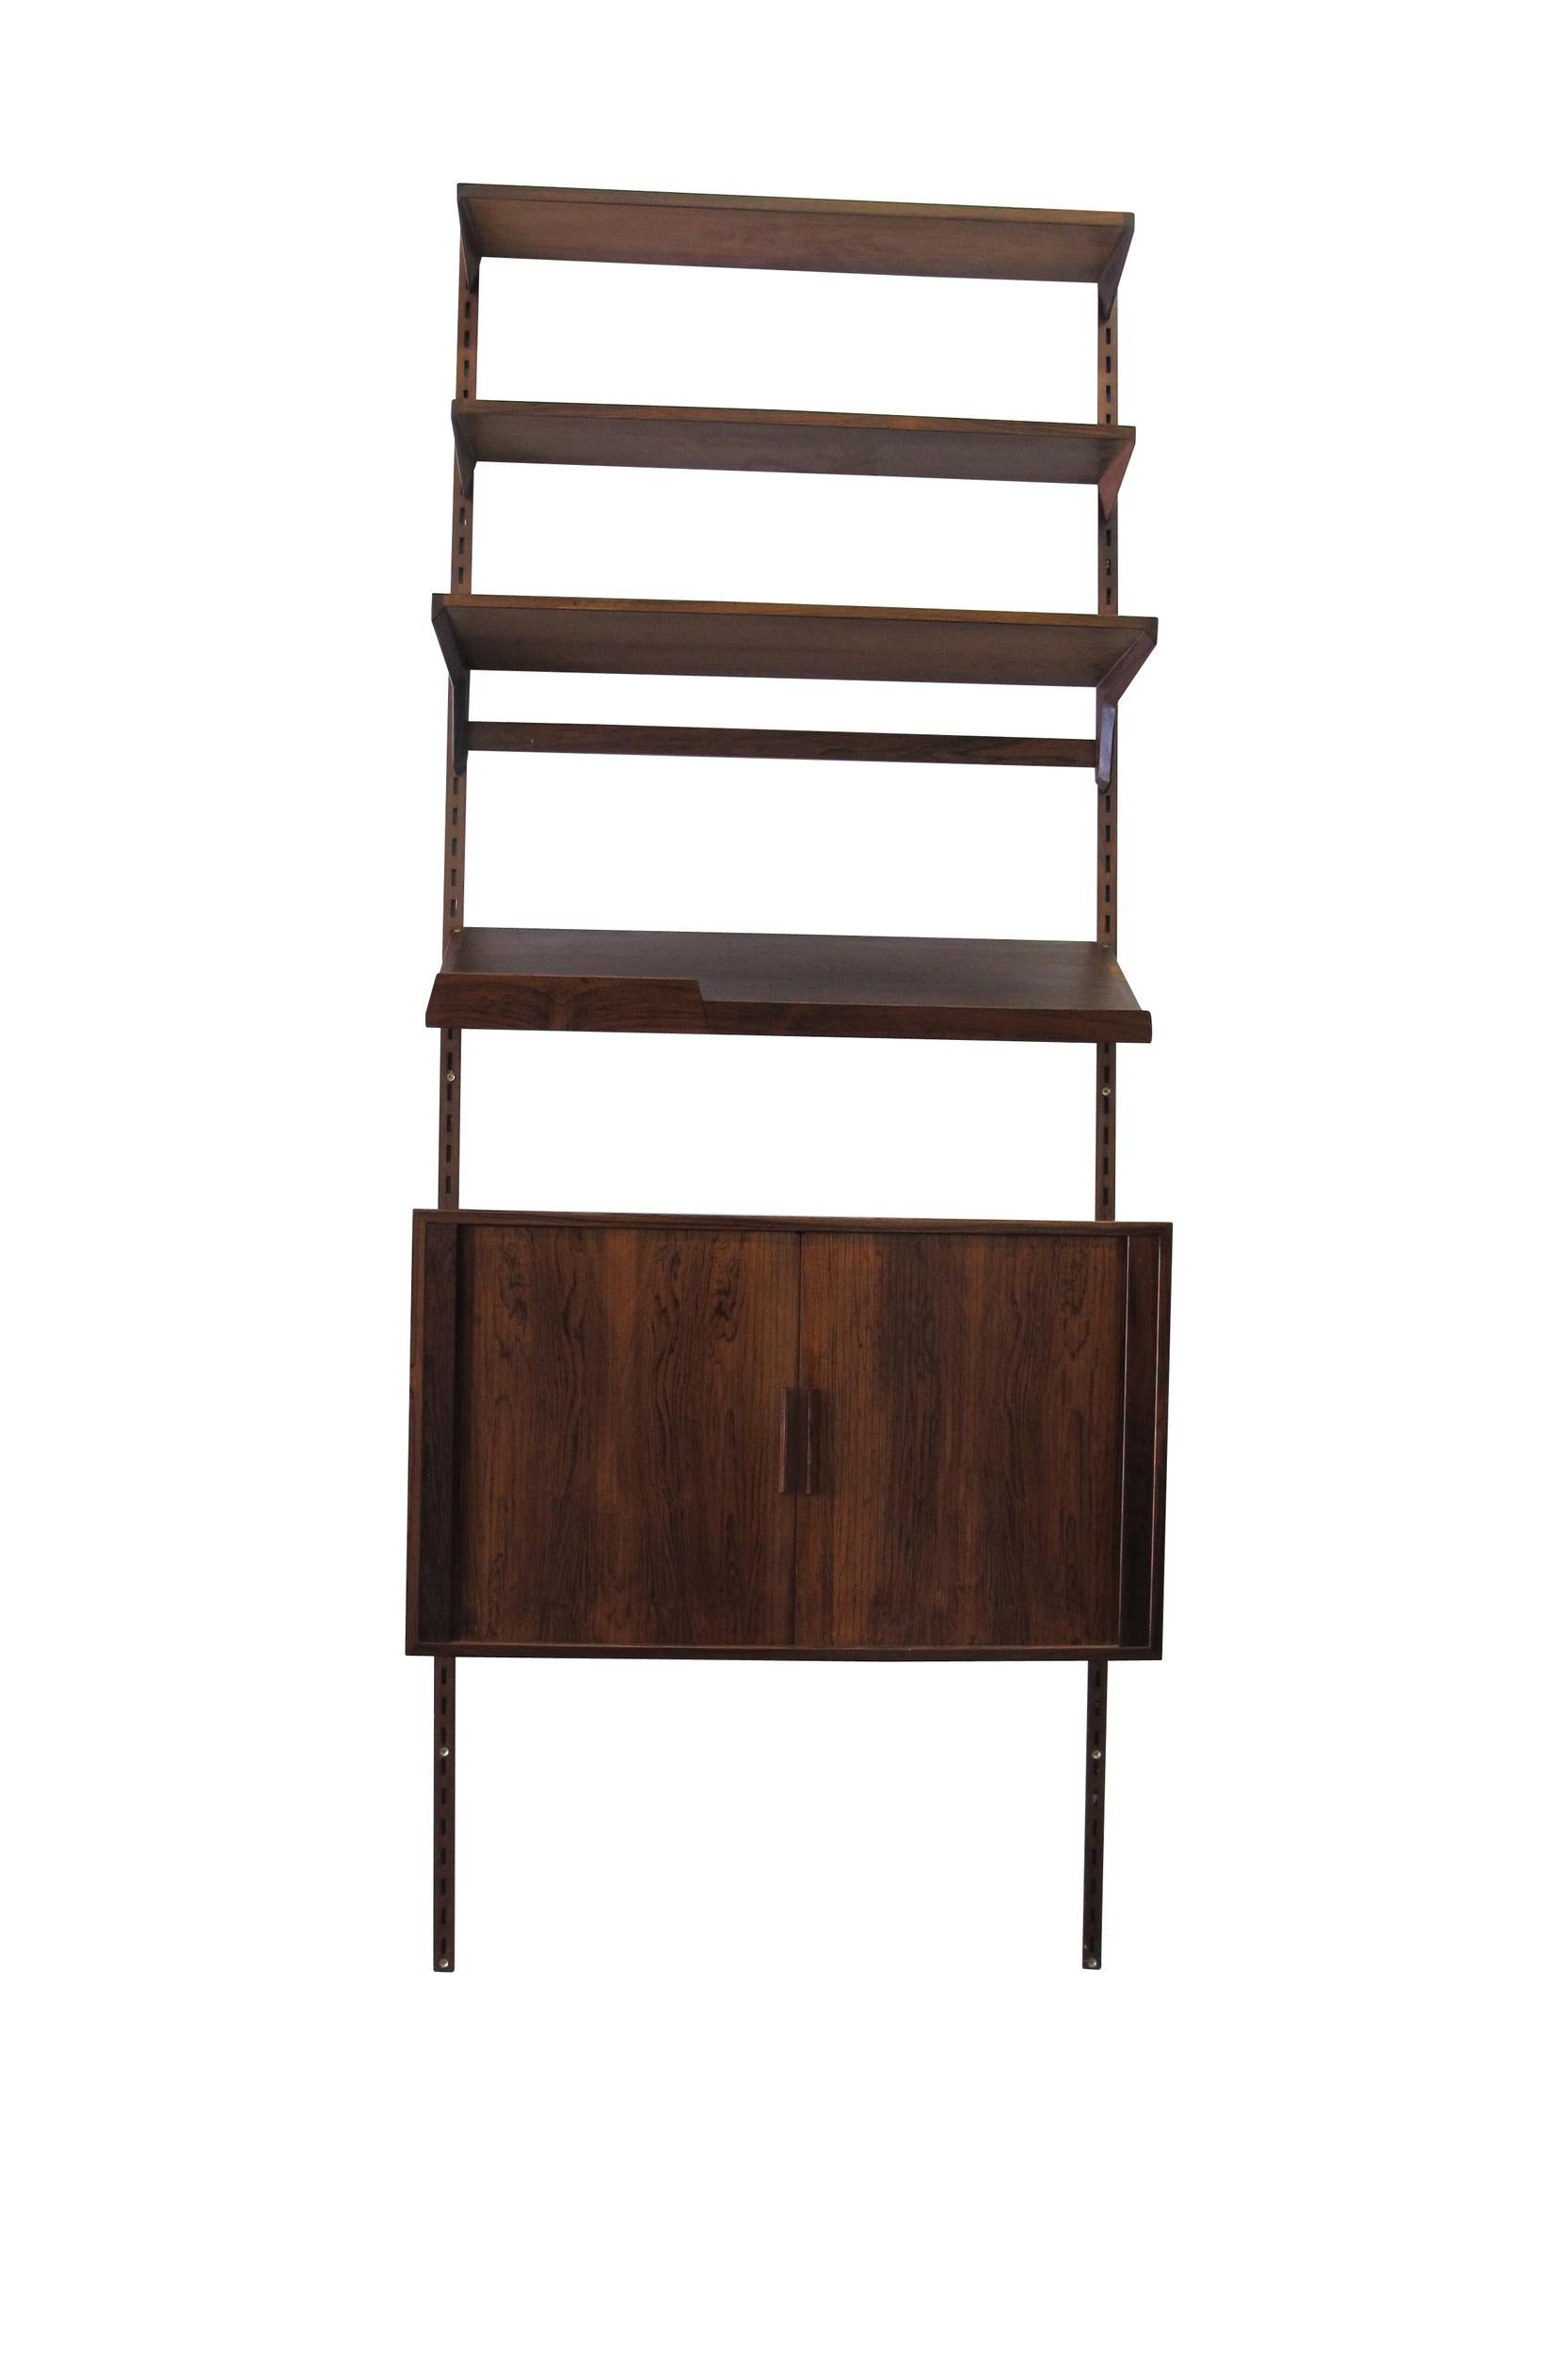 Midcentury Brazilian rosewood wall system designed by Kai Kristiansen for Feldballes Mobelfabrik Denmark. Kai Kristiansen's FM-Reolsystem is a fully interchangeable Danish wall mount shelving system customizable to any configuration. Crafted in